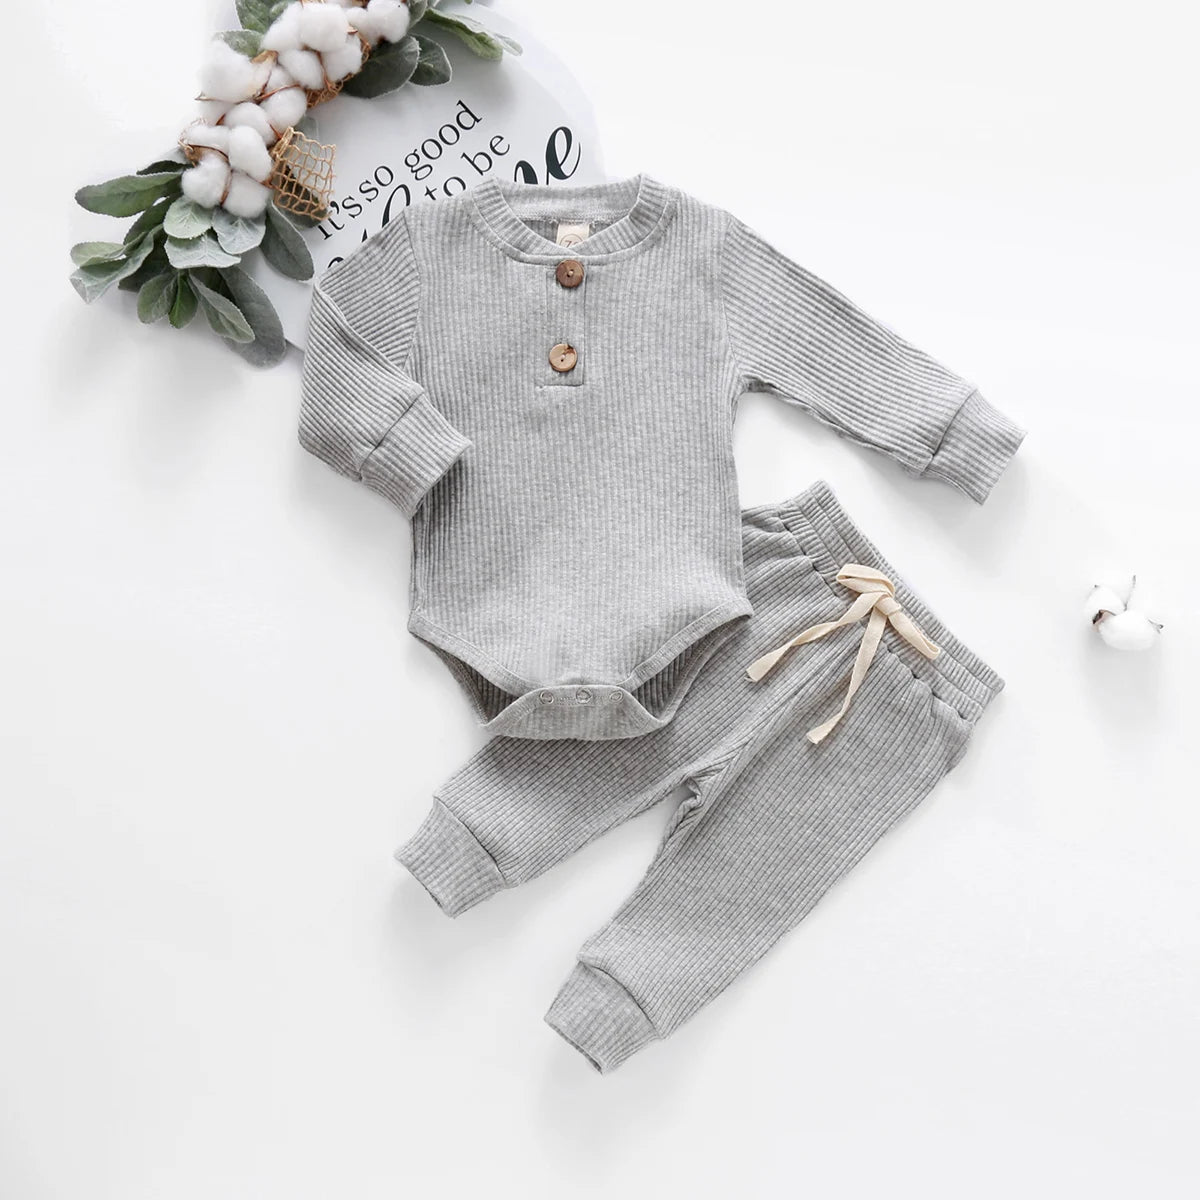 Infant Newborn Baby Girl Boy Spring Autumn Ribbed/Plaid Solid Clothes Sets Long Sleeve Bodysuits + Elastic Pants 2PCs Outfits pudcoco Official Store